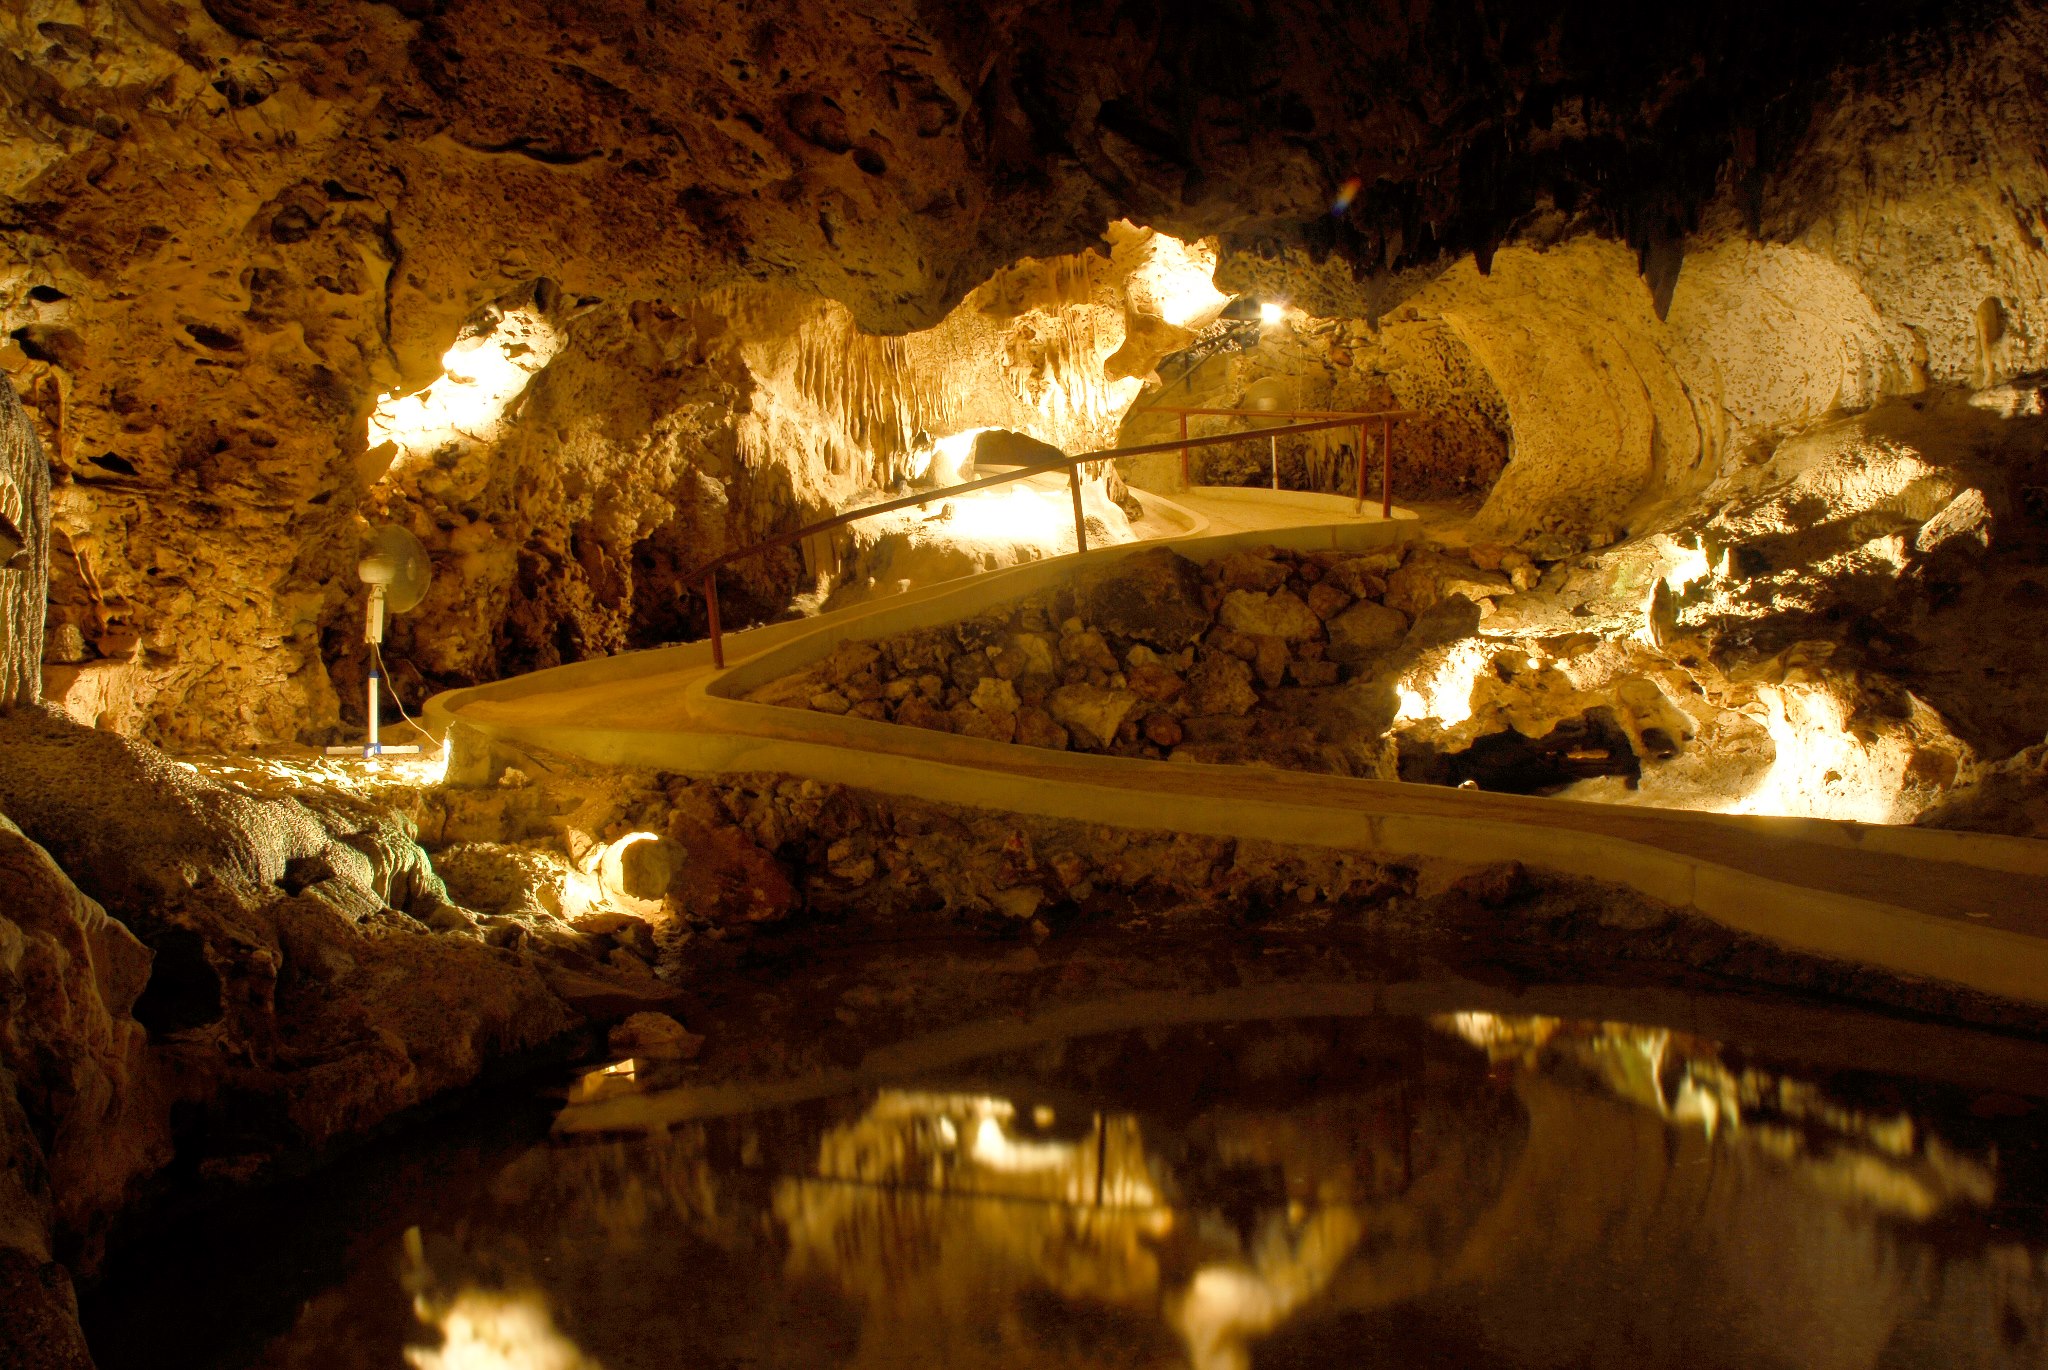 Explore the Hato Caves on the Caribbean Island of Caracoa, new Willemstad. Photo Credit: Caracao Hato Caves